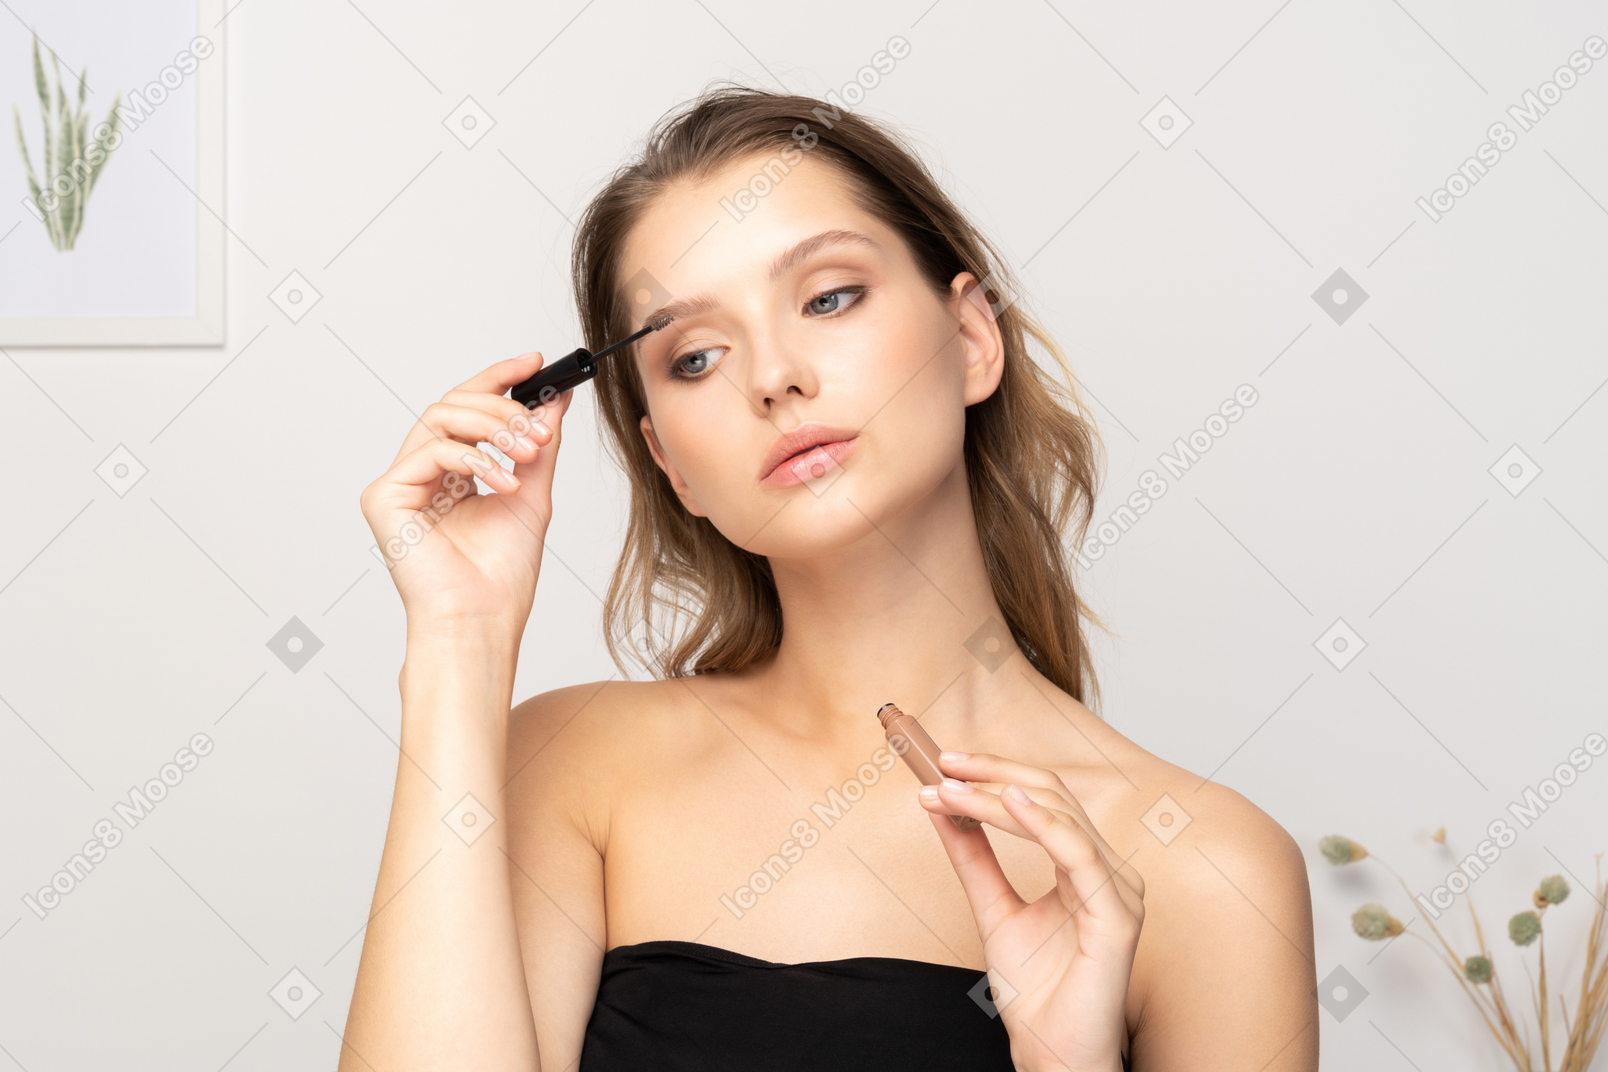 Front view of a young woman wearing black top holding brushing her eyebrows